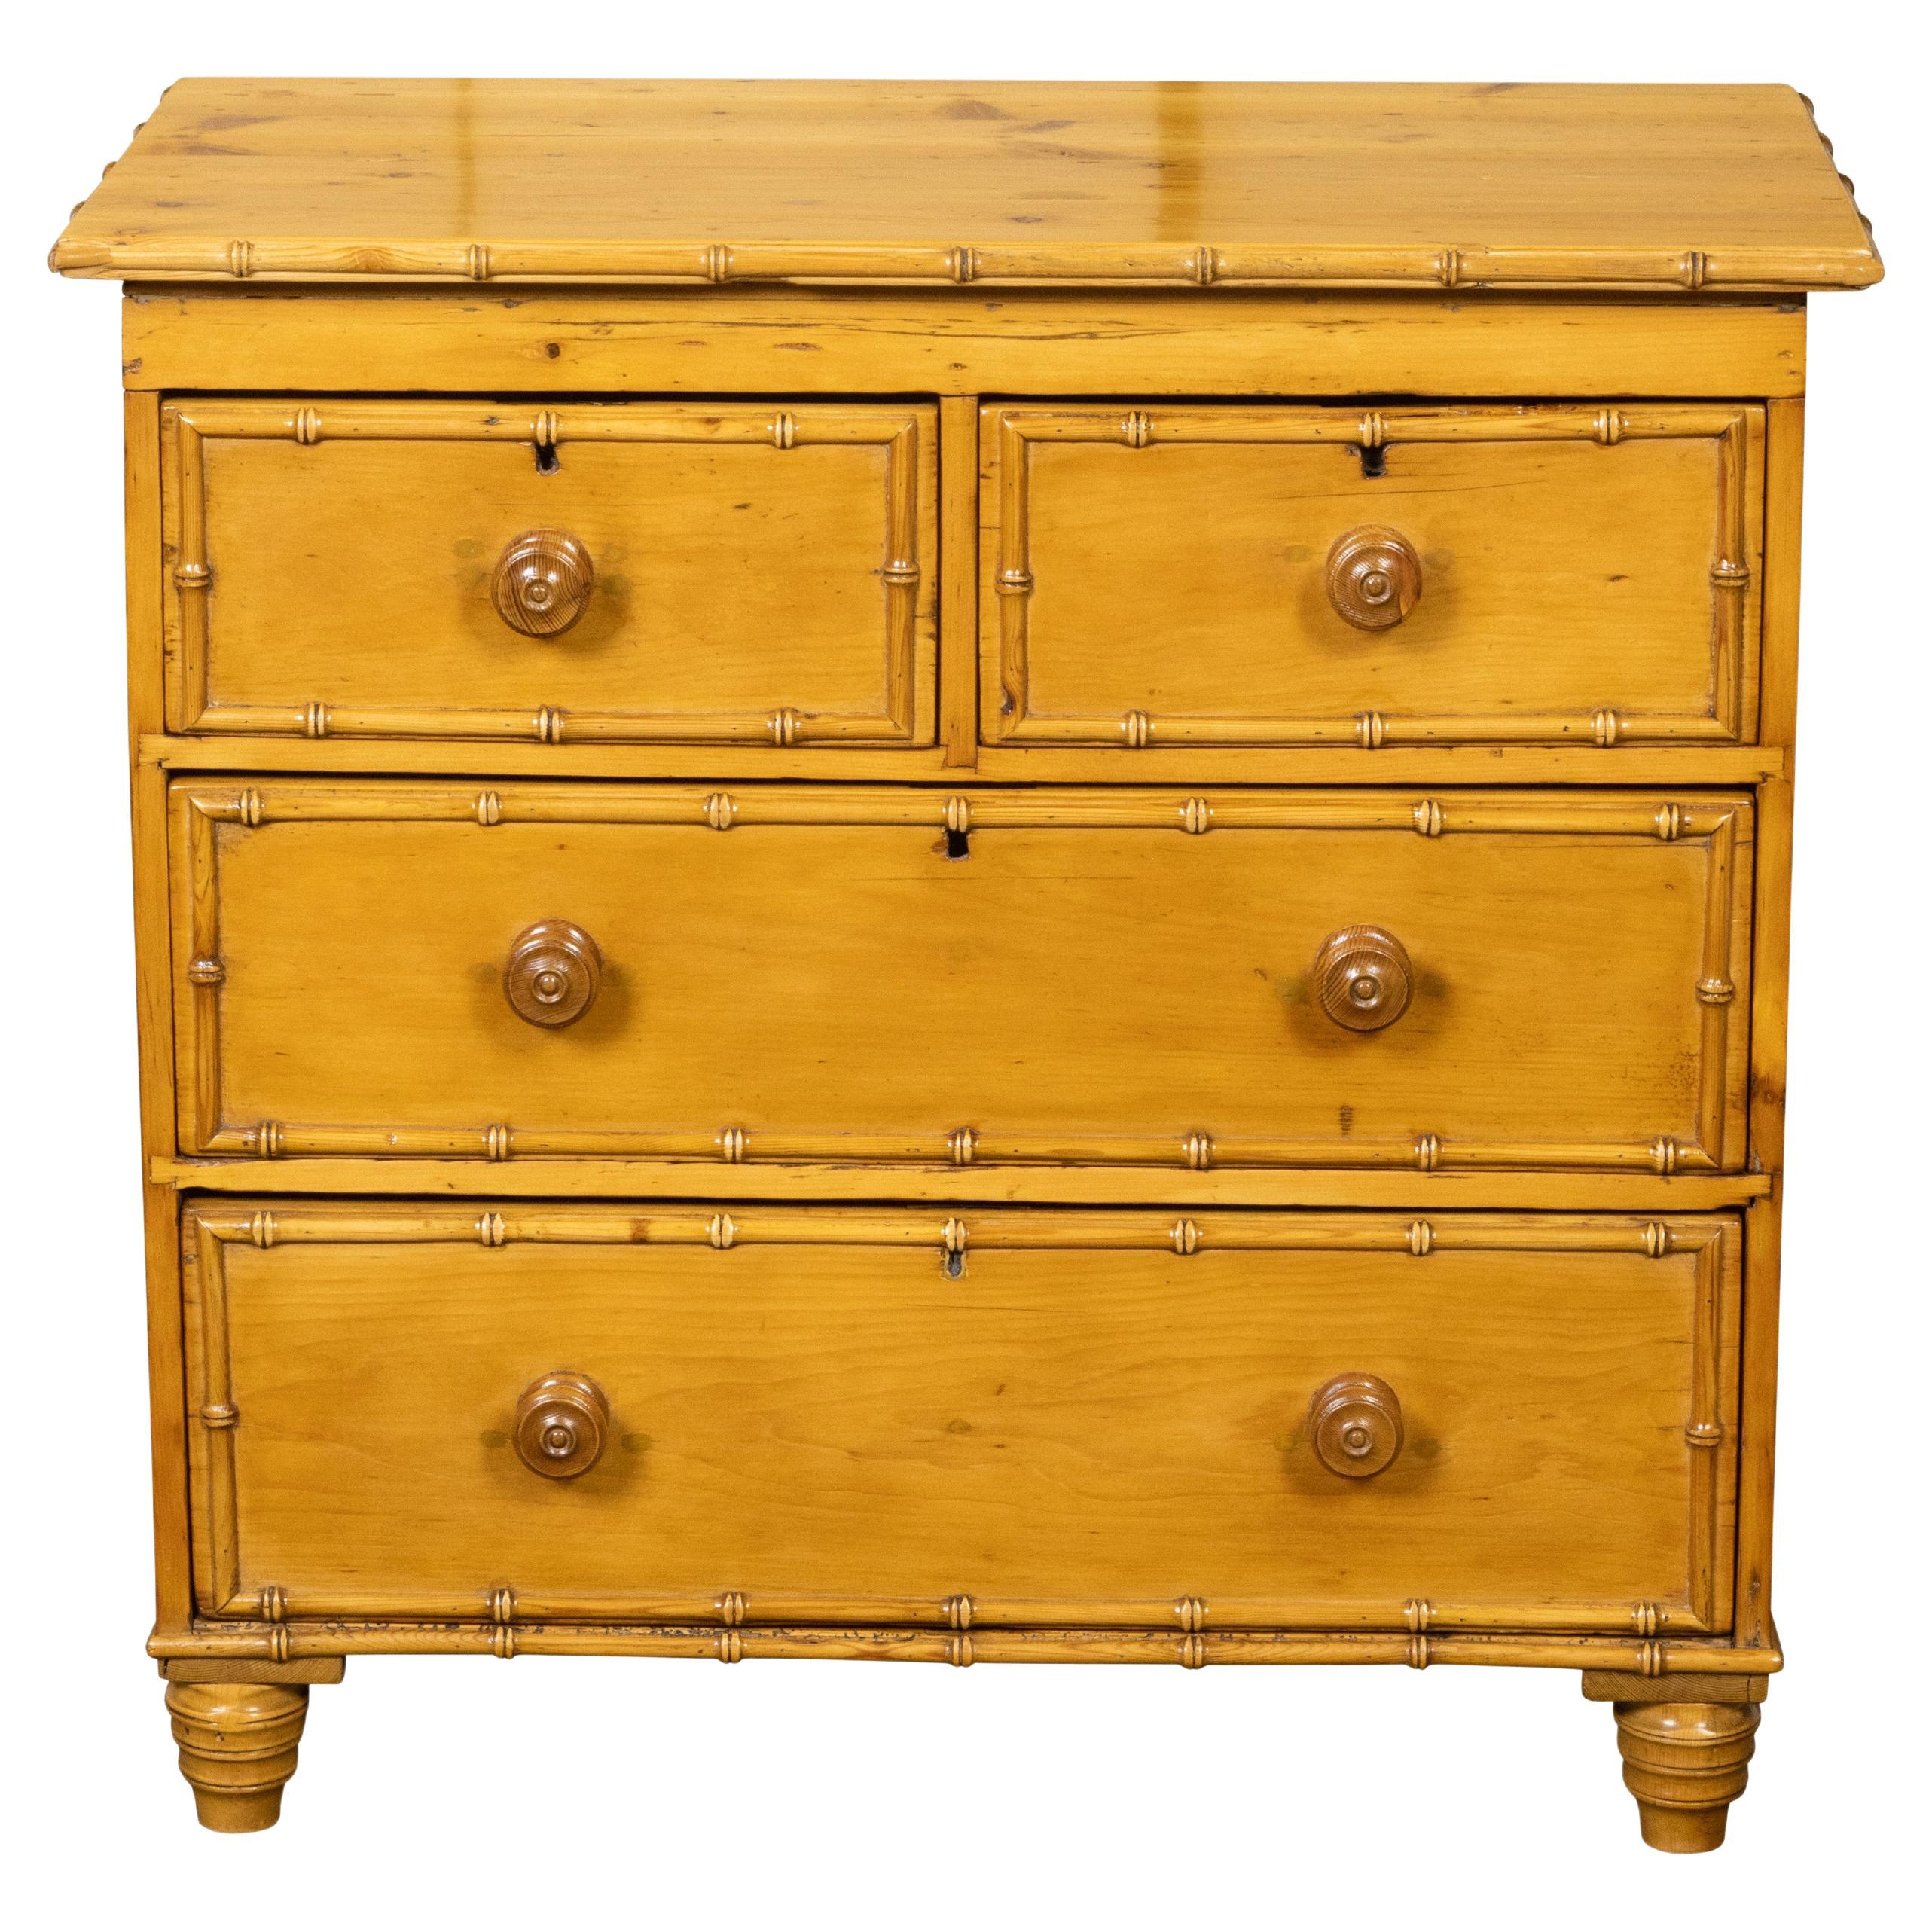 Rustic English 19th Century Pine Four-Drawer Chest with Faux Bamboo Accents